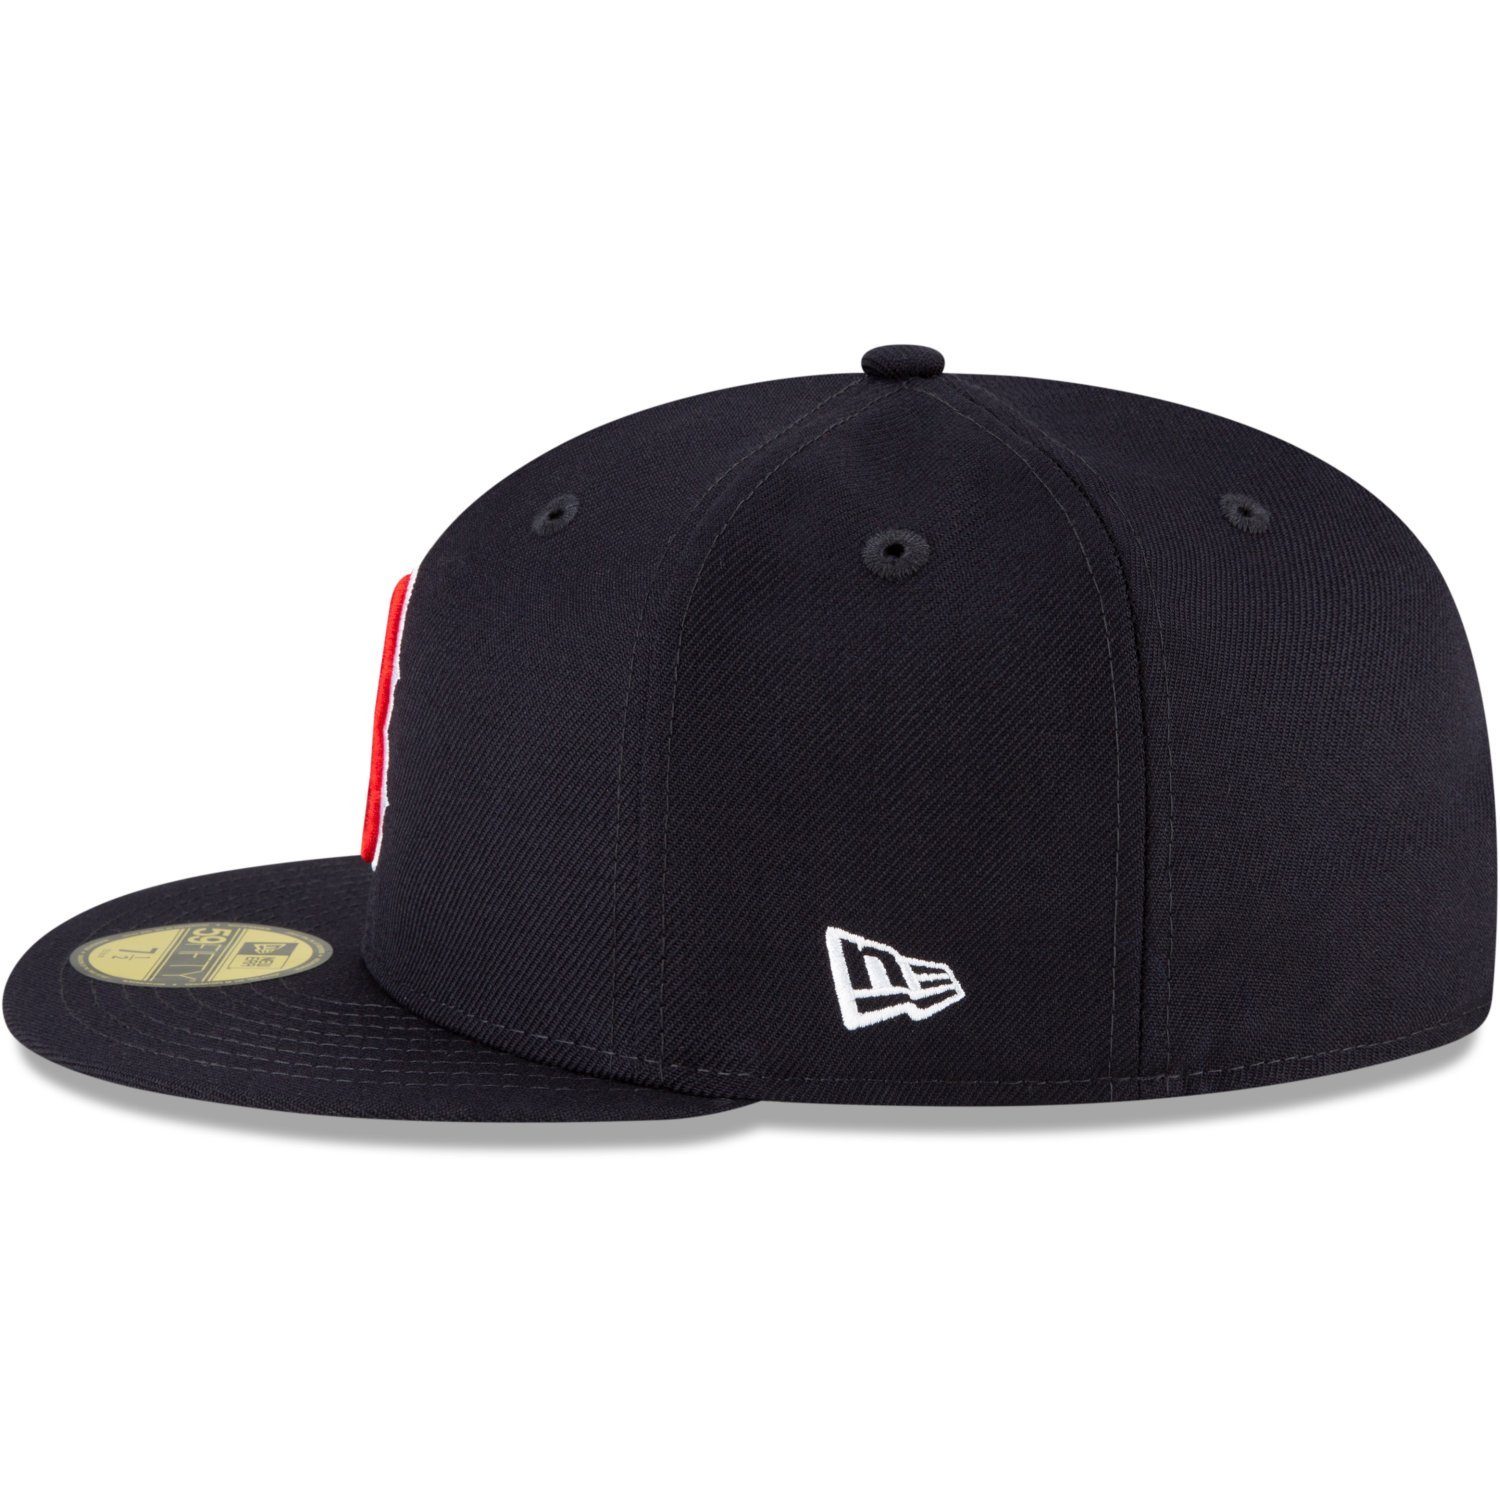 59Fifty Era New WORLD SERIES Sox Boston Red Fitted Cap